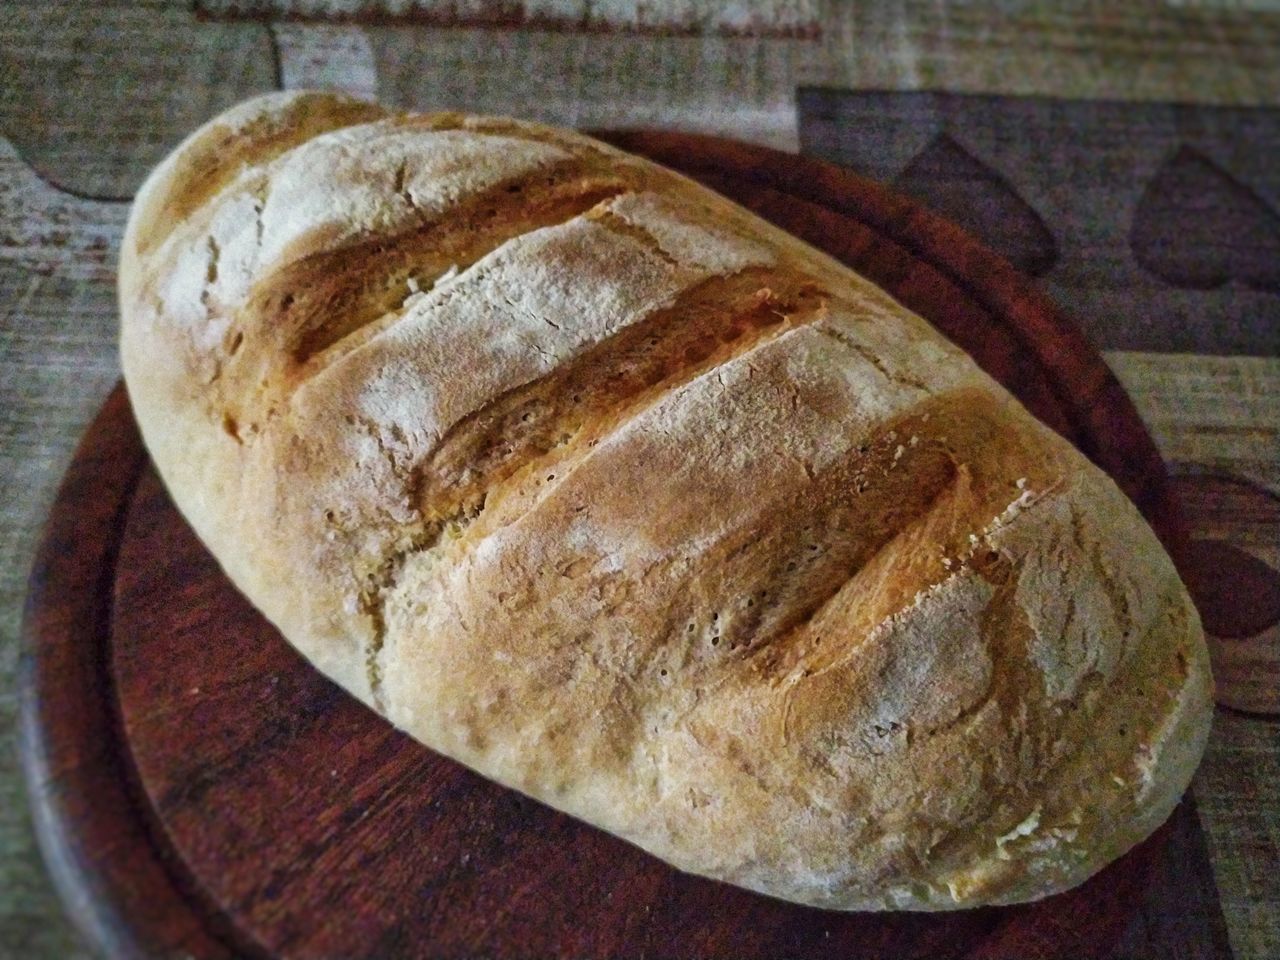 Homemade bread. Homemade Food Pane Fatto In Casa Smartphone Photography AndroidPhotography Rn8t Redmi Note 8t Loaf Of Bread Bread Baking Bread Close-up Food And Drink